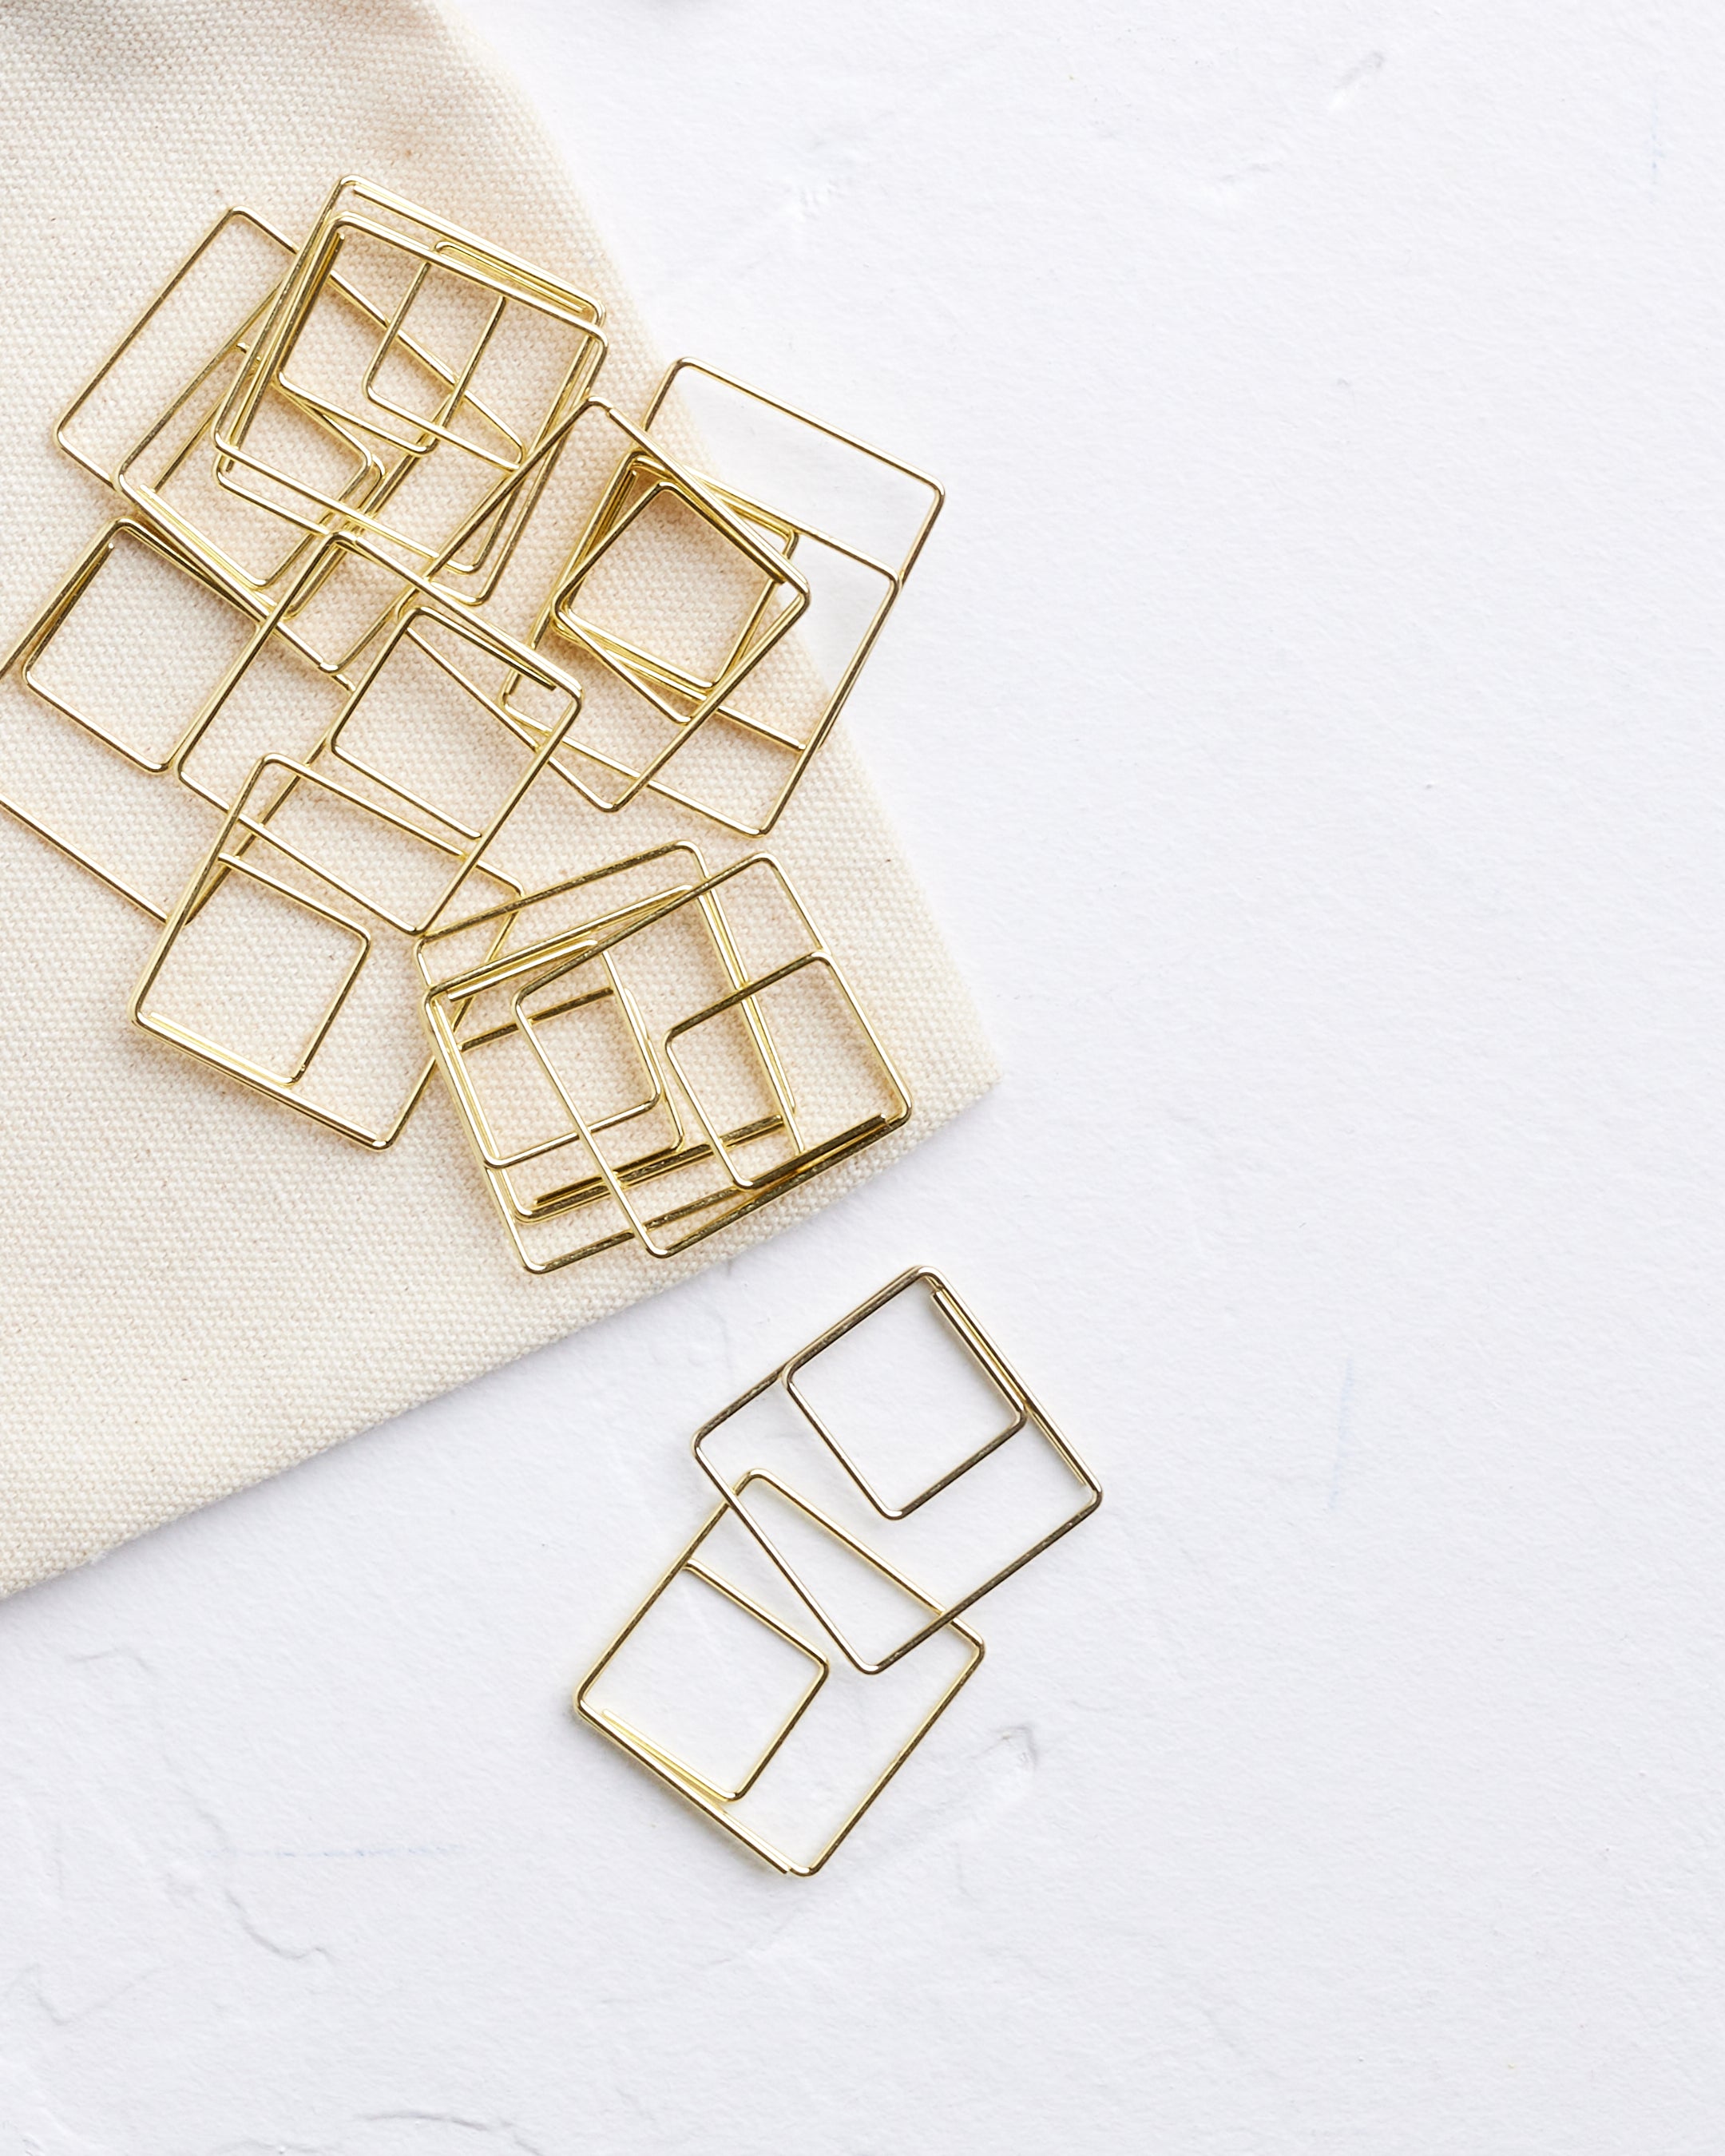 Gold Square Paper Clips